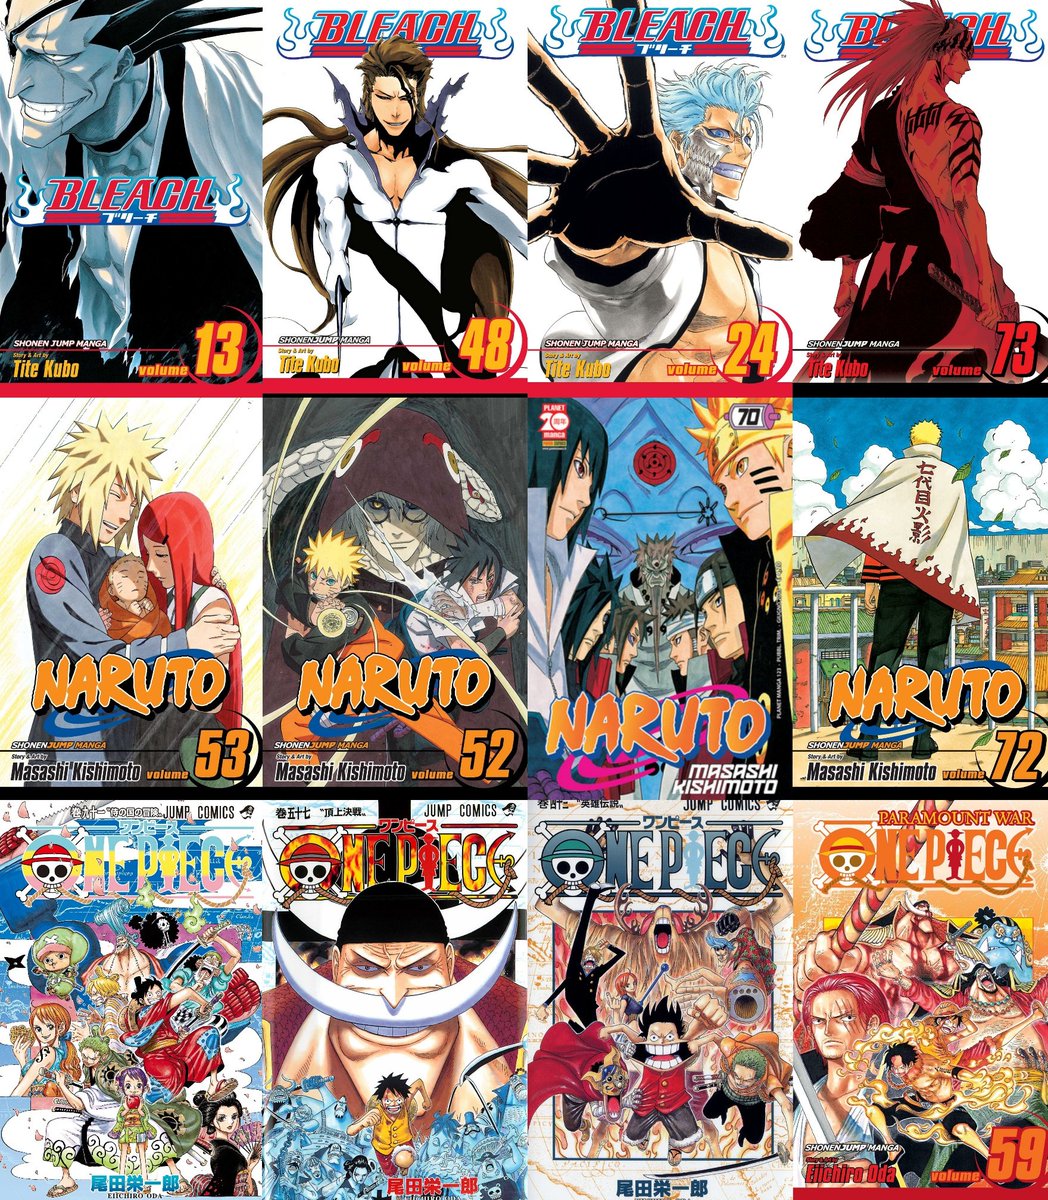 Seinenjump Who Has The Best Manga Volume Covers Of The Big 3 Bleach Naruto Or One Piece